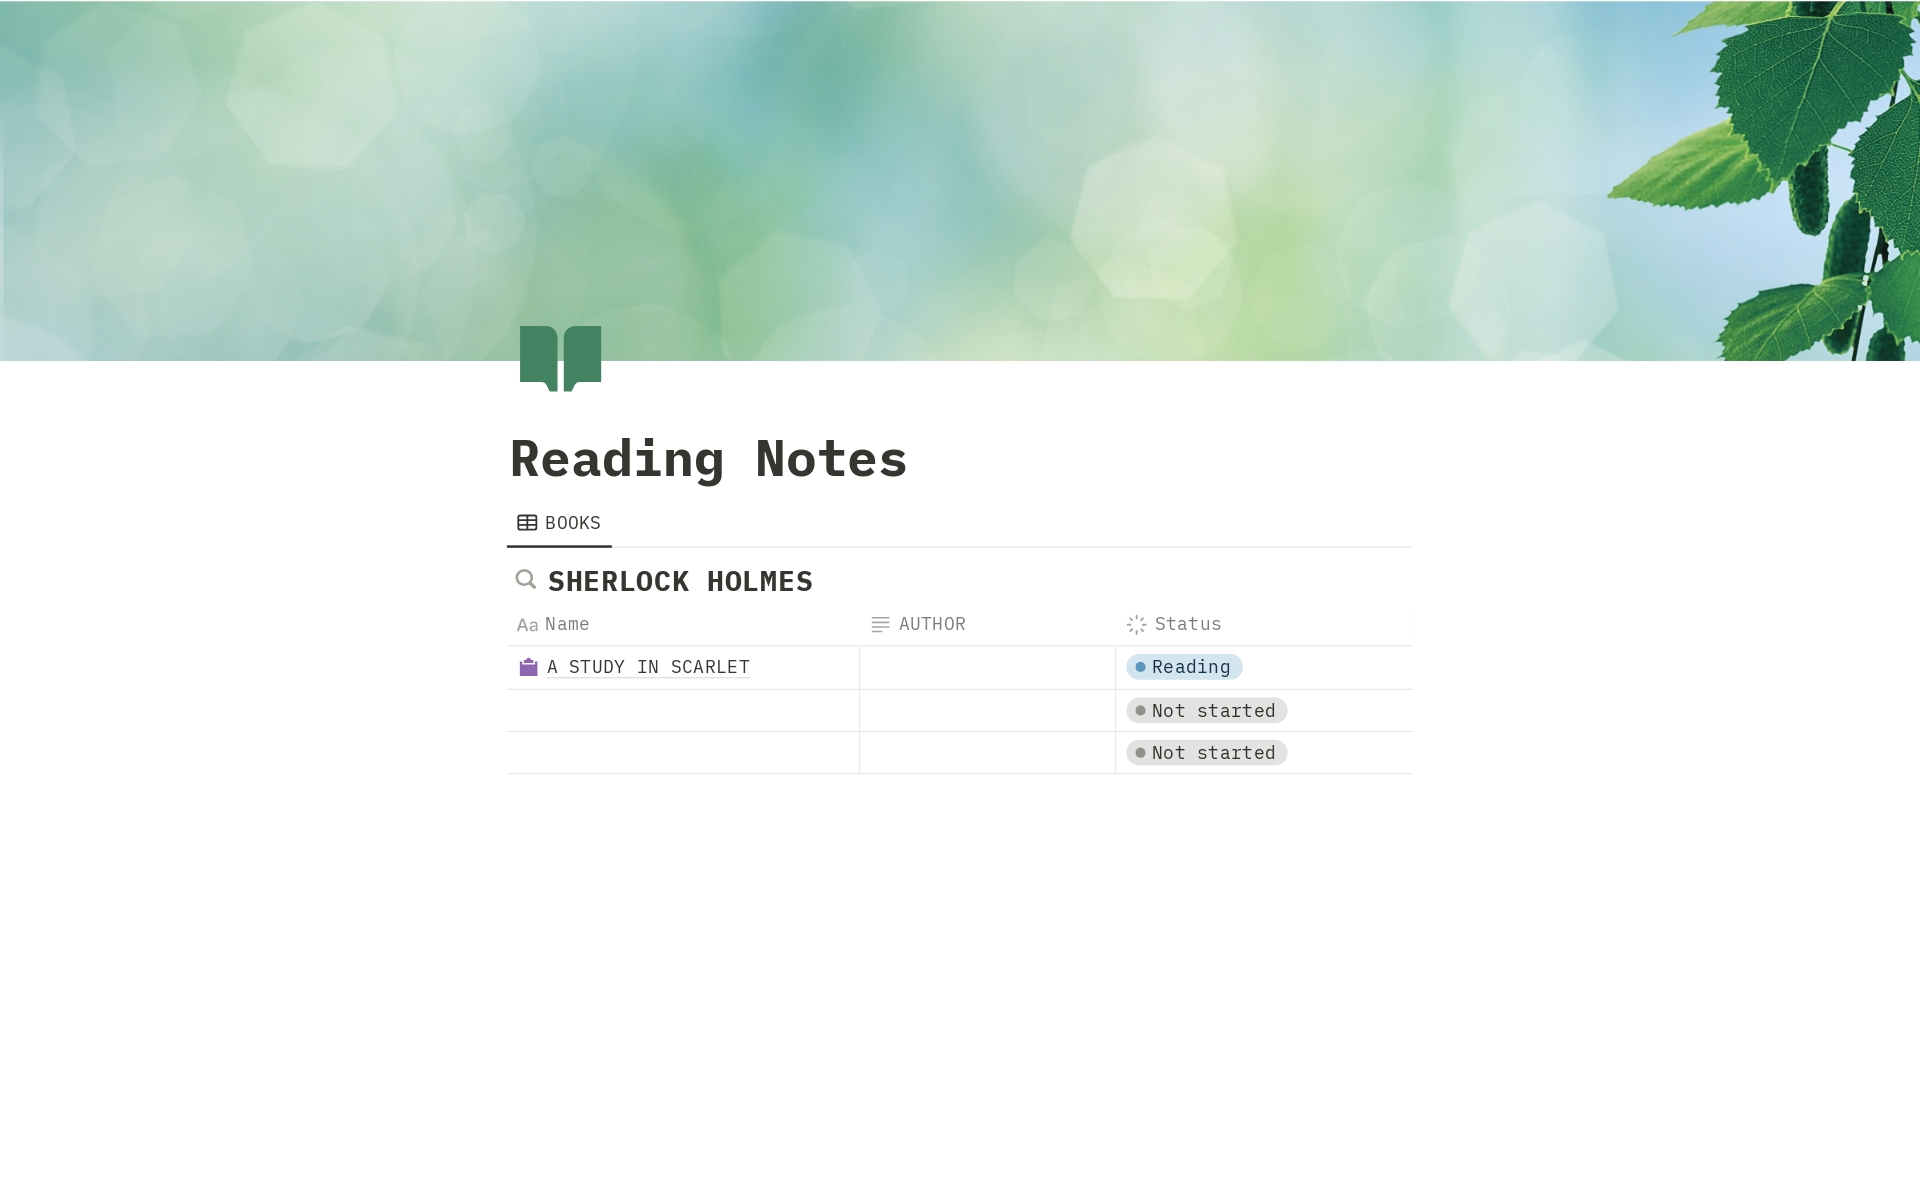 A nice, simple way to keep track and record your notes from reading.
